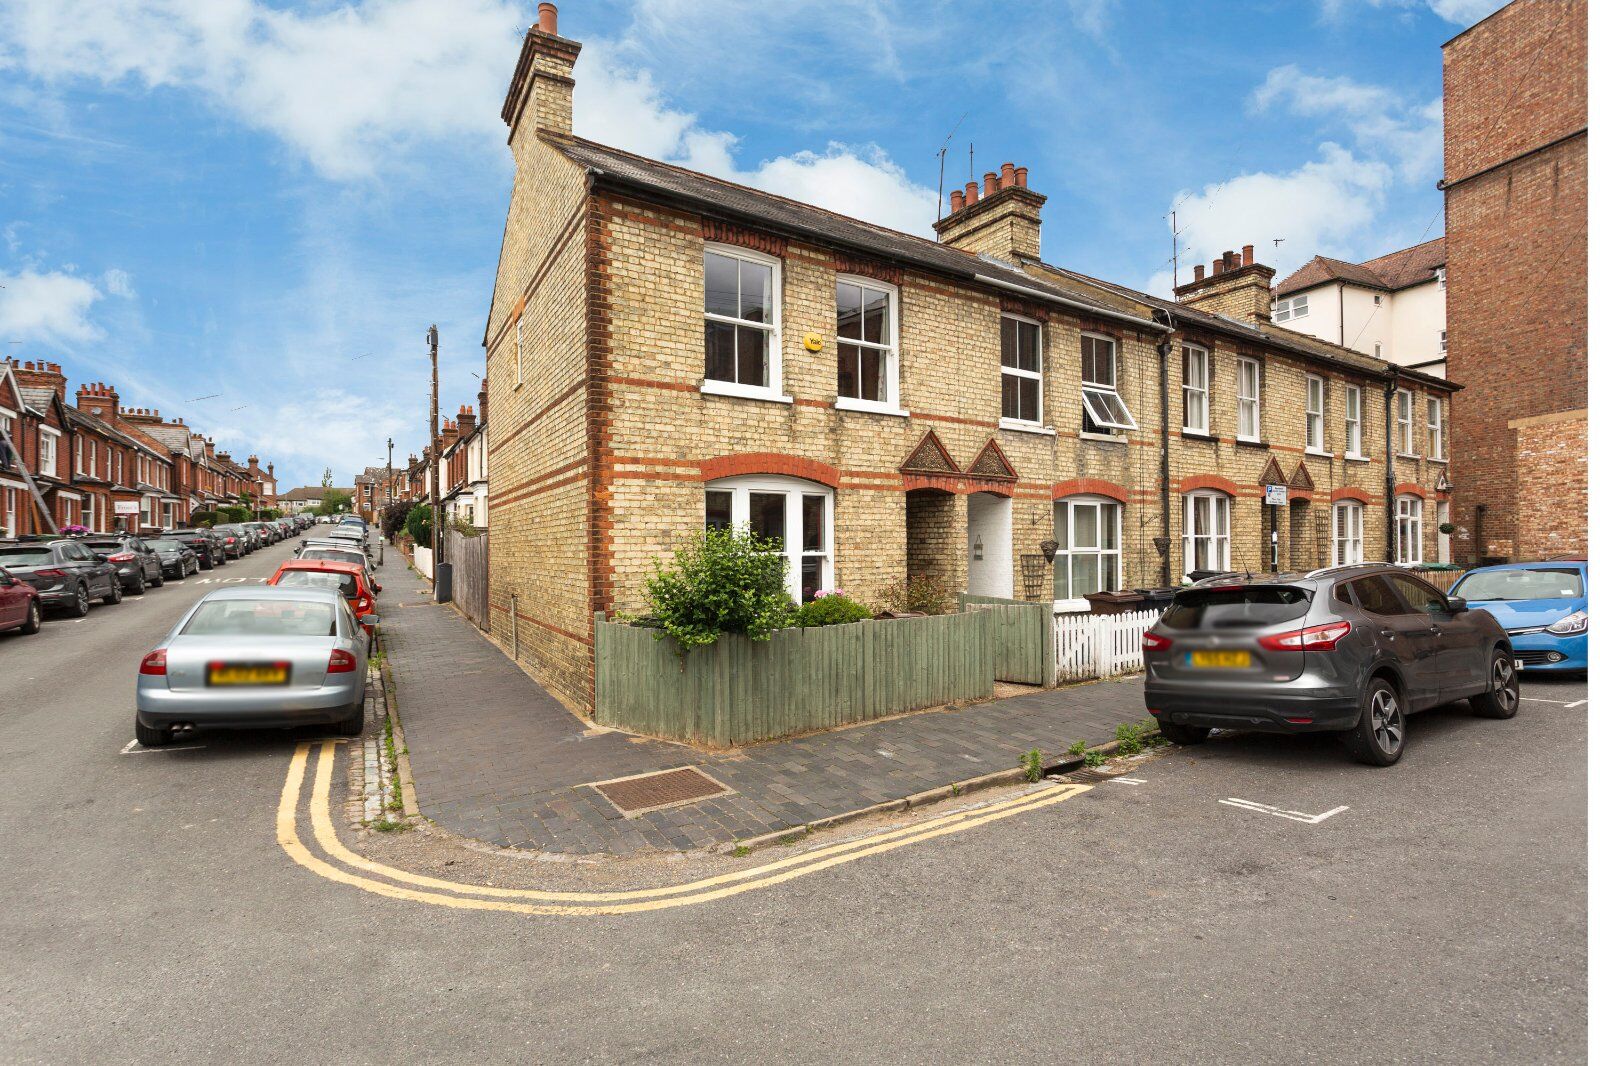 3 bedroom end terraced house for sale Lower Paxton Road, St. Albans, AL1, main image